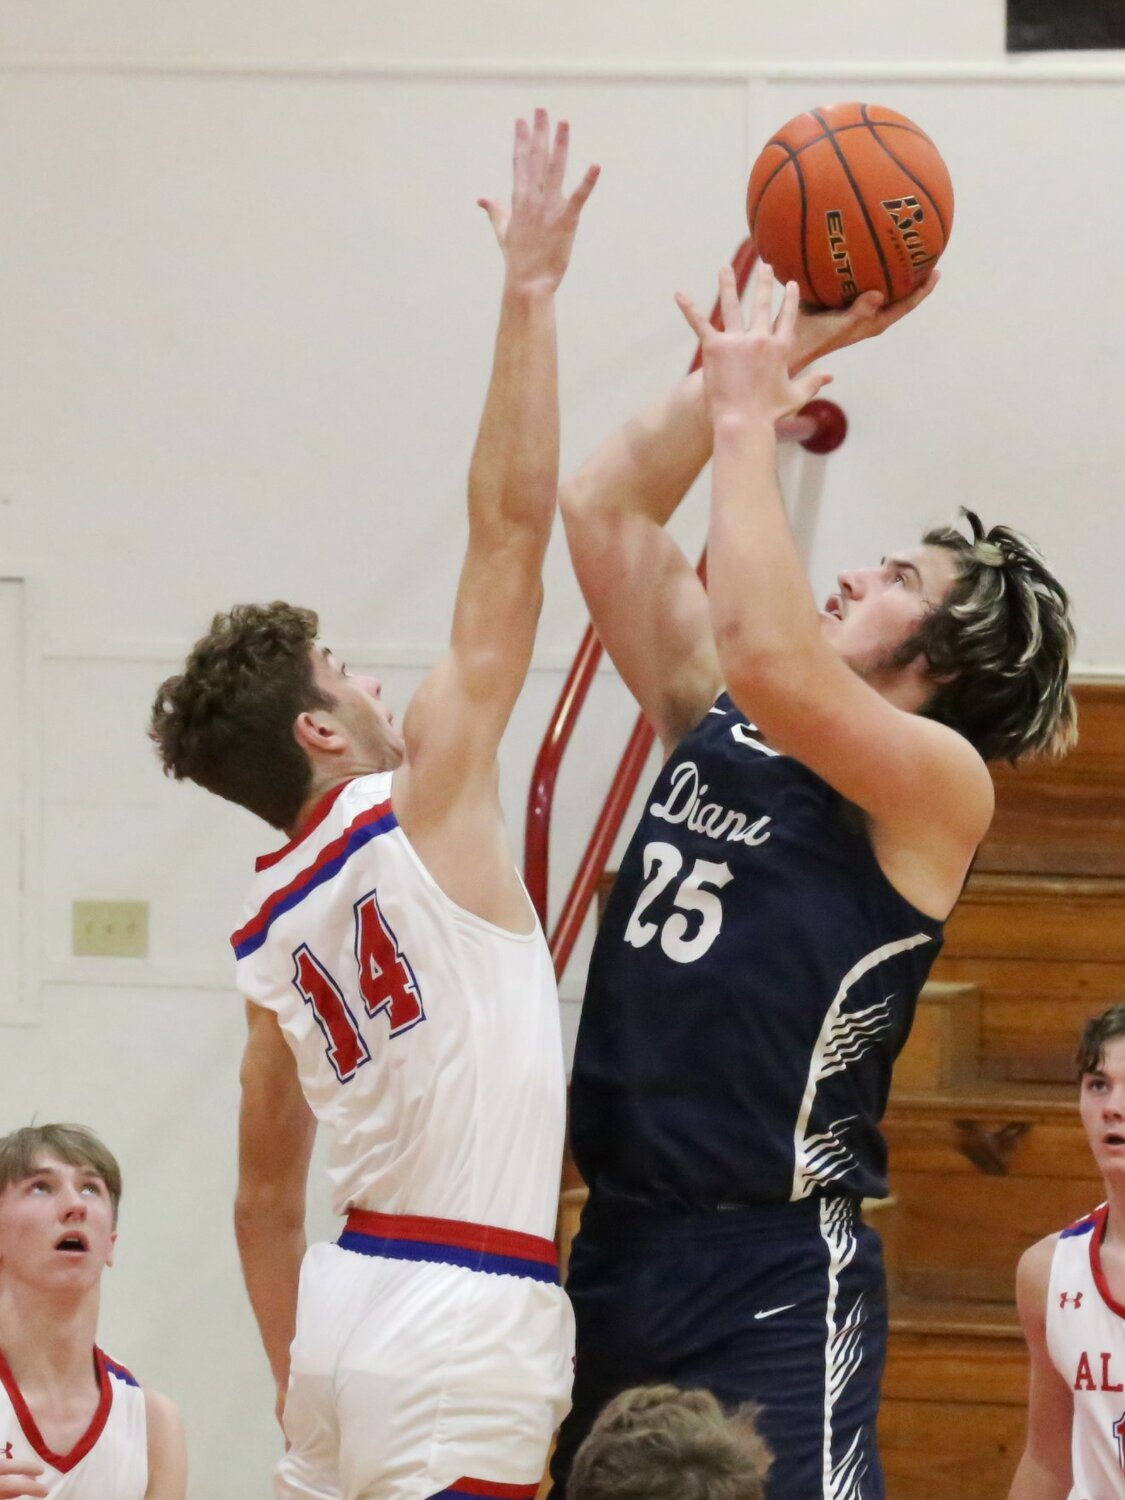 Wyatt Sutton challenges a shot from the New Diana low post in action last Friday.